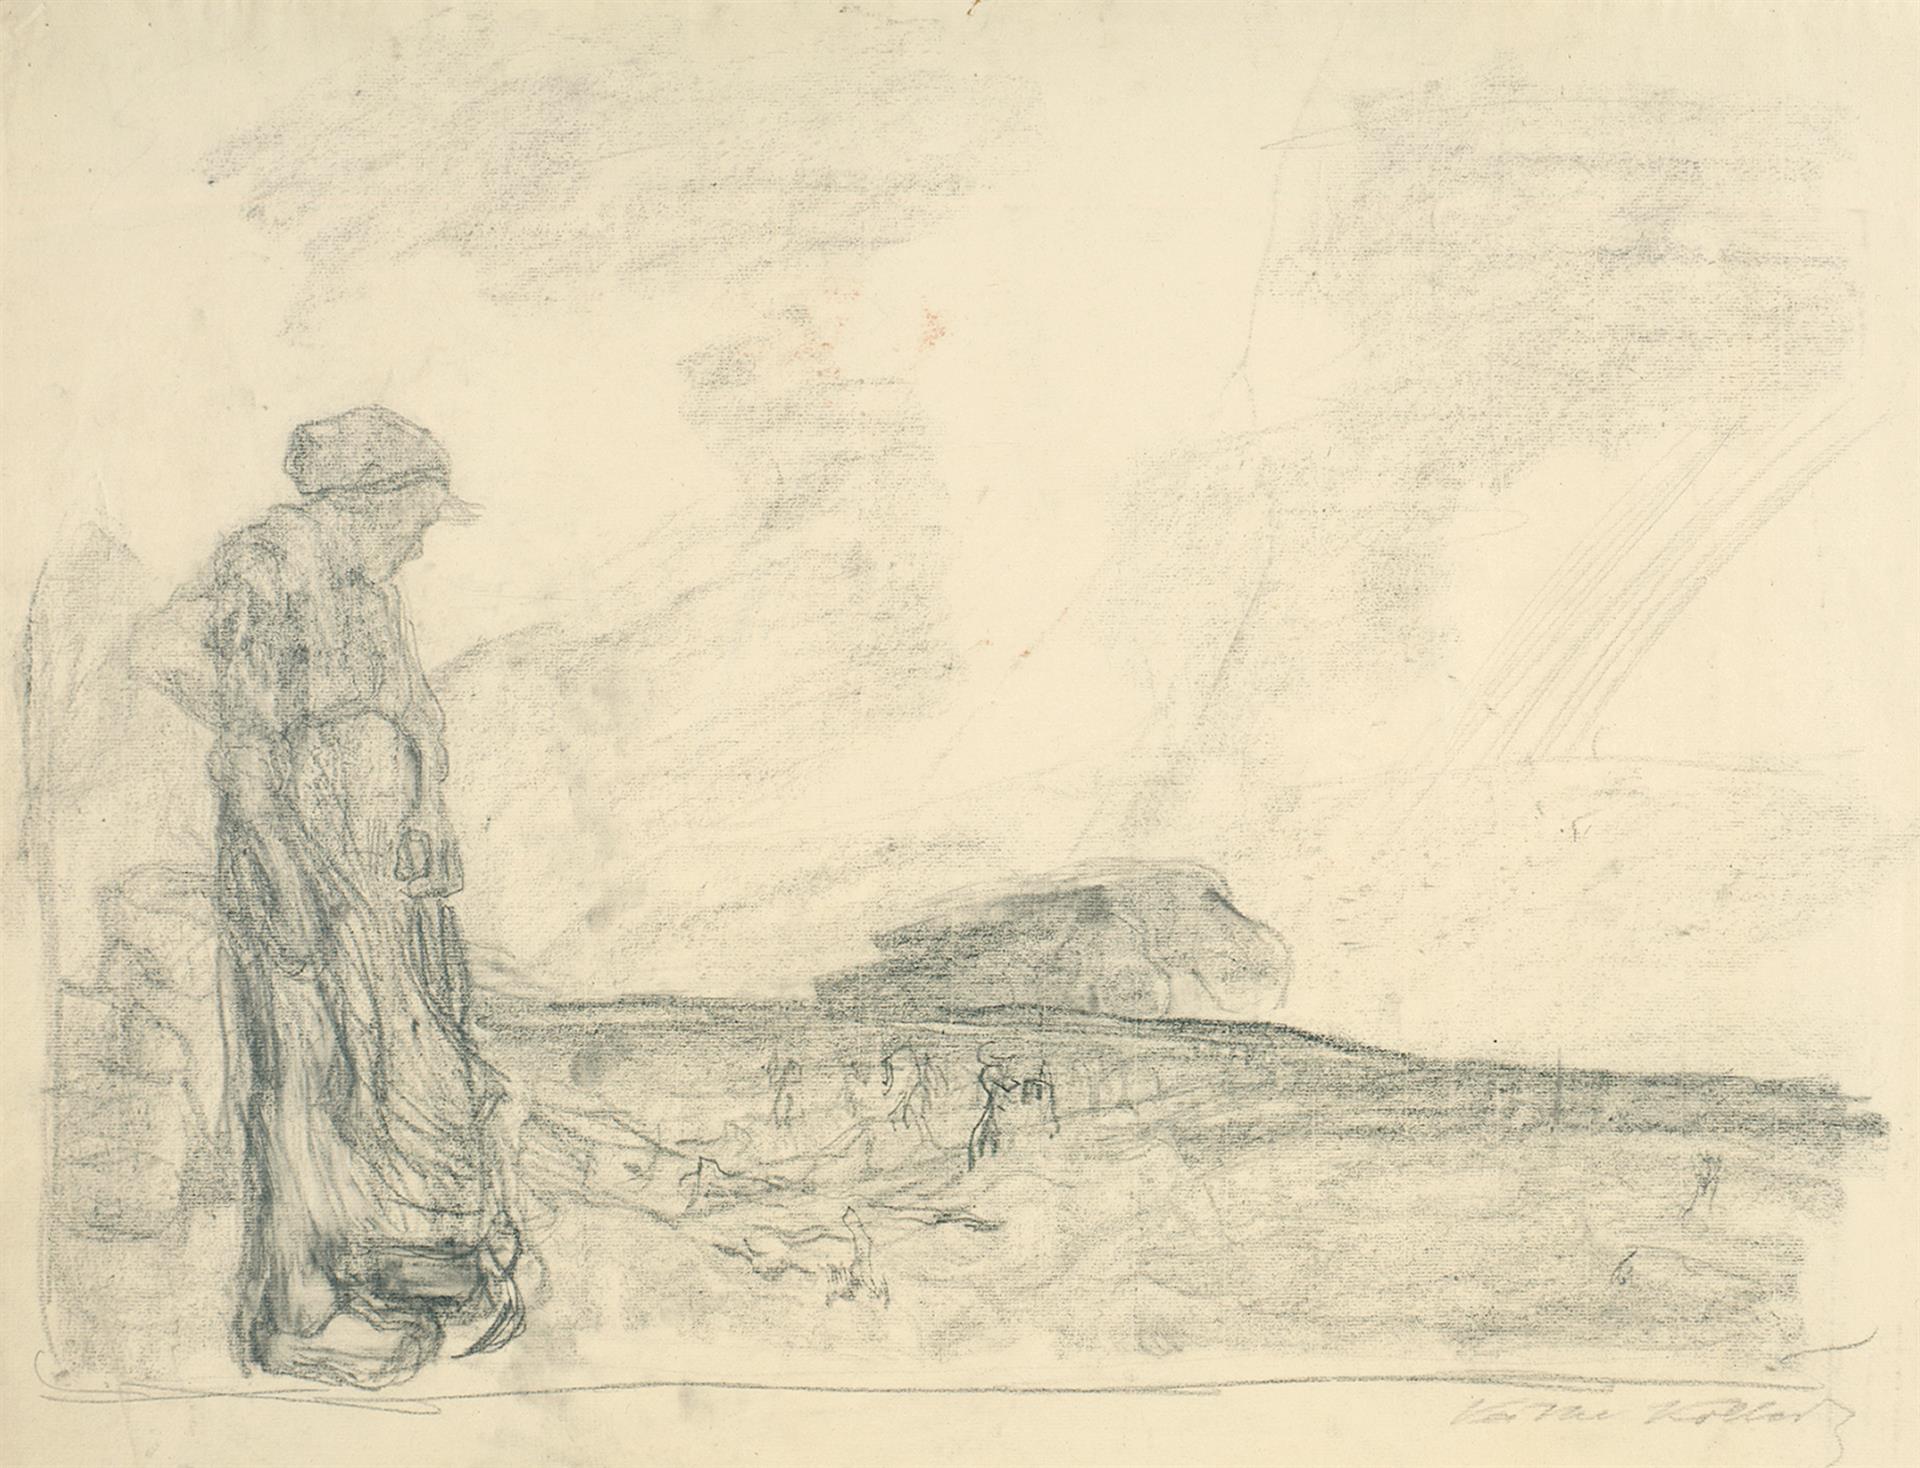 Käthe Kollwitz, Ploughmen with Woman standing in the Foreground, c 1904, pencil and charcoal, NT 207, Cologne Kollwitz Collection © Käthe Kollwitz Museum Köln